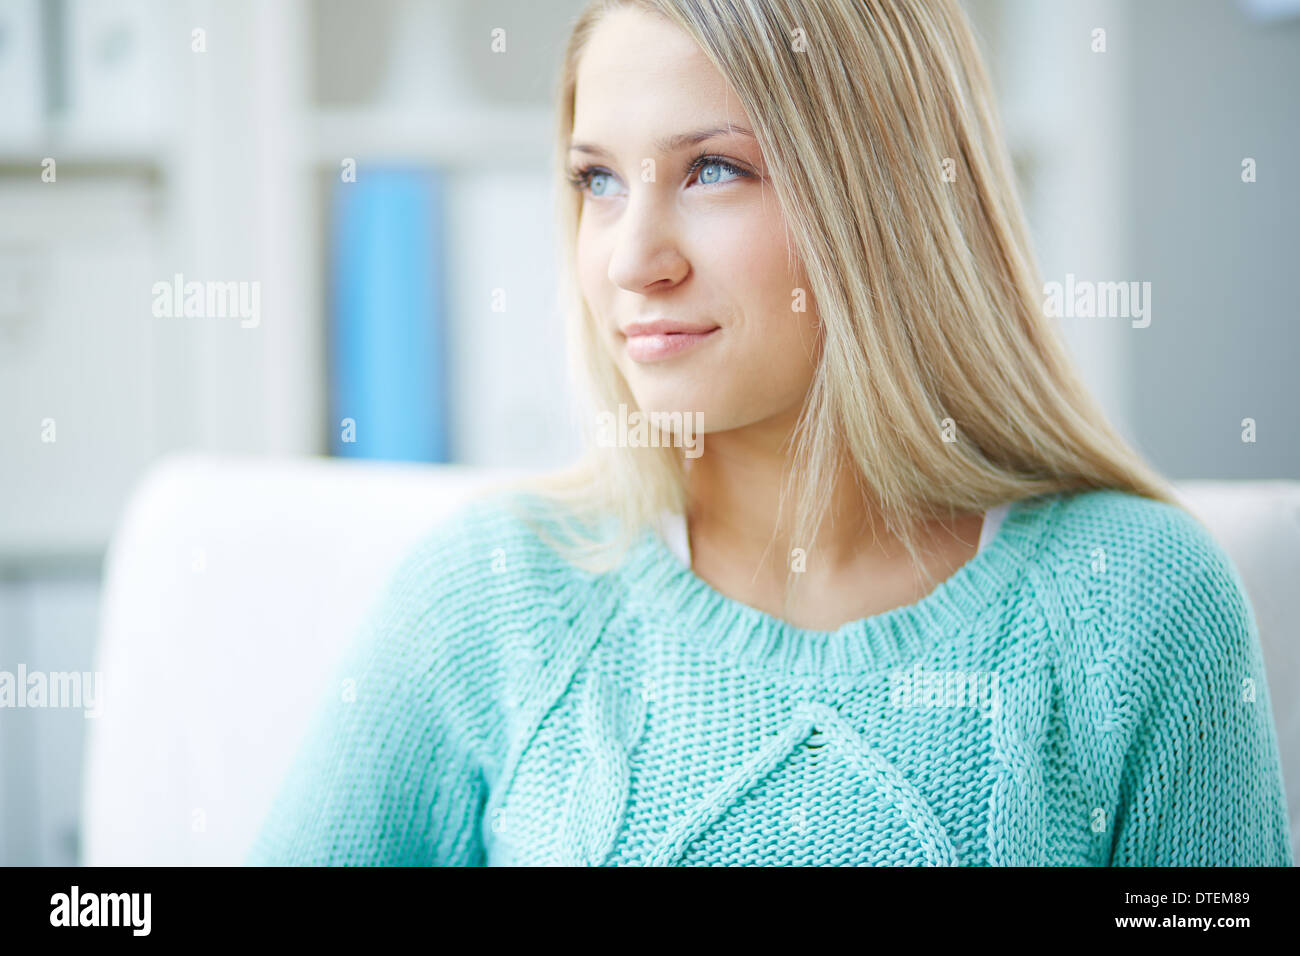 Pretty girl looking pensively away Stock Photo